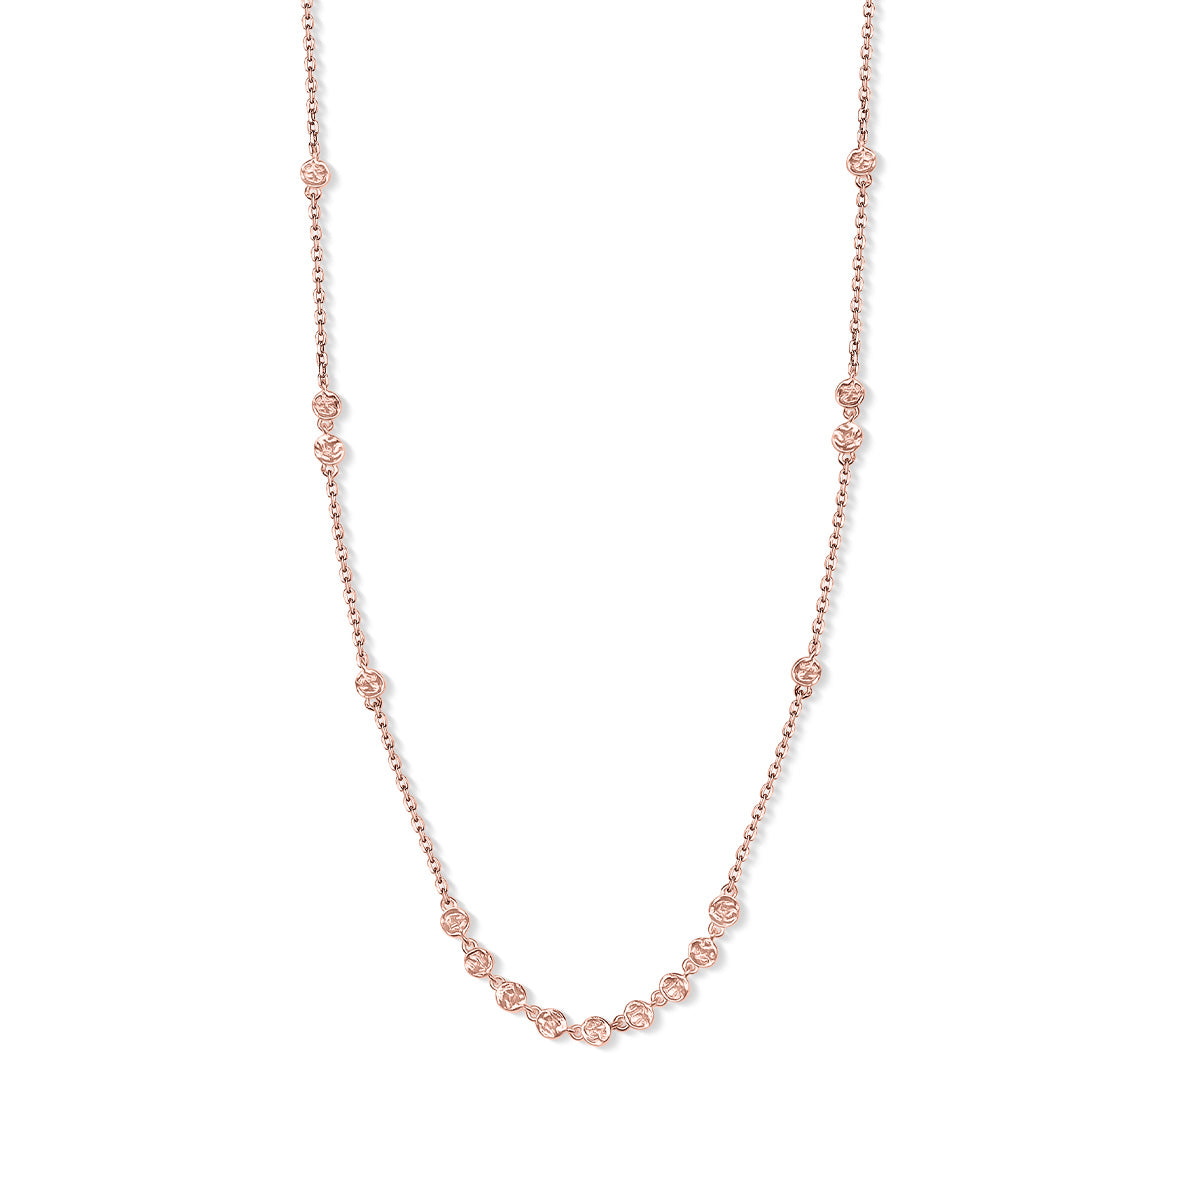 Rose gold choker necklace with pendants